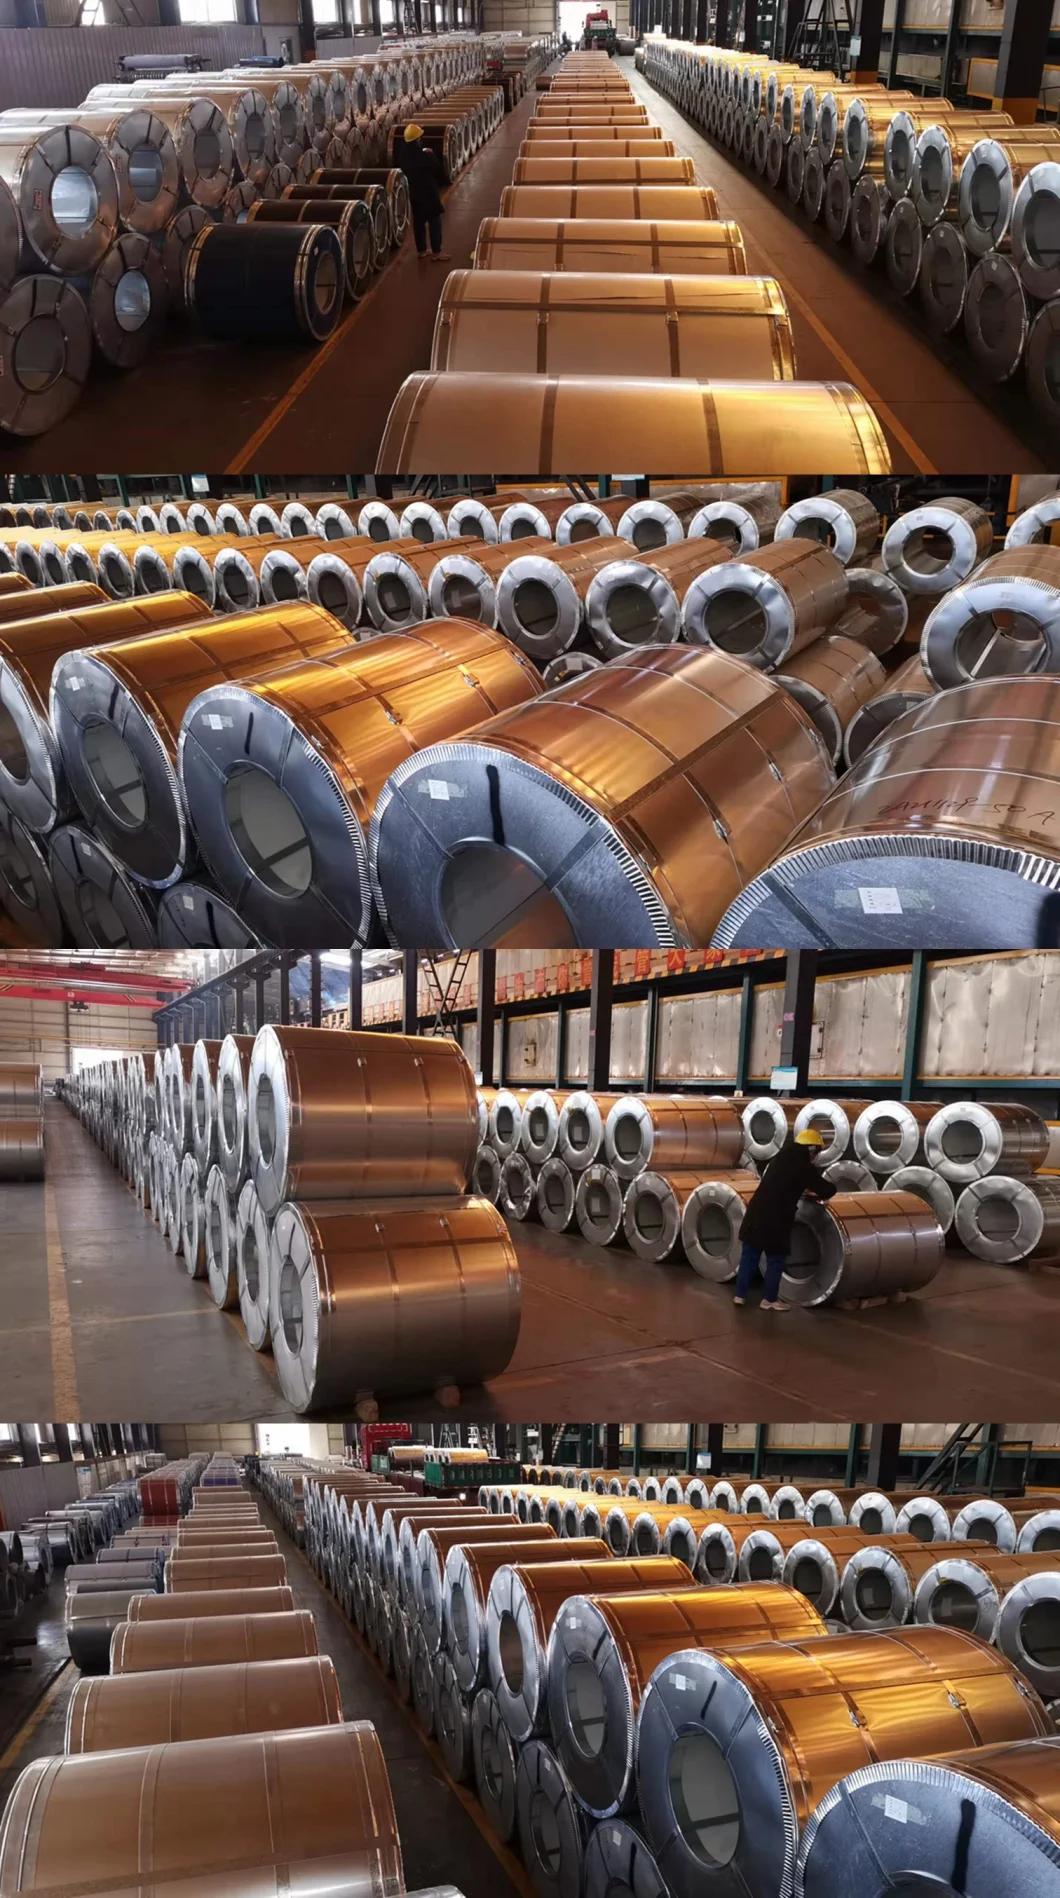 Low Price Structural Bar Chinese Manufacturers Coil Rebar Building Material Steel Wire Rod